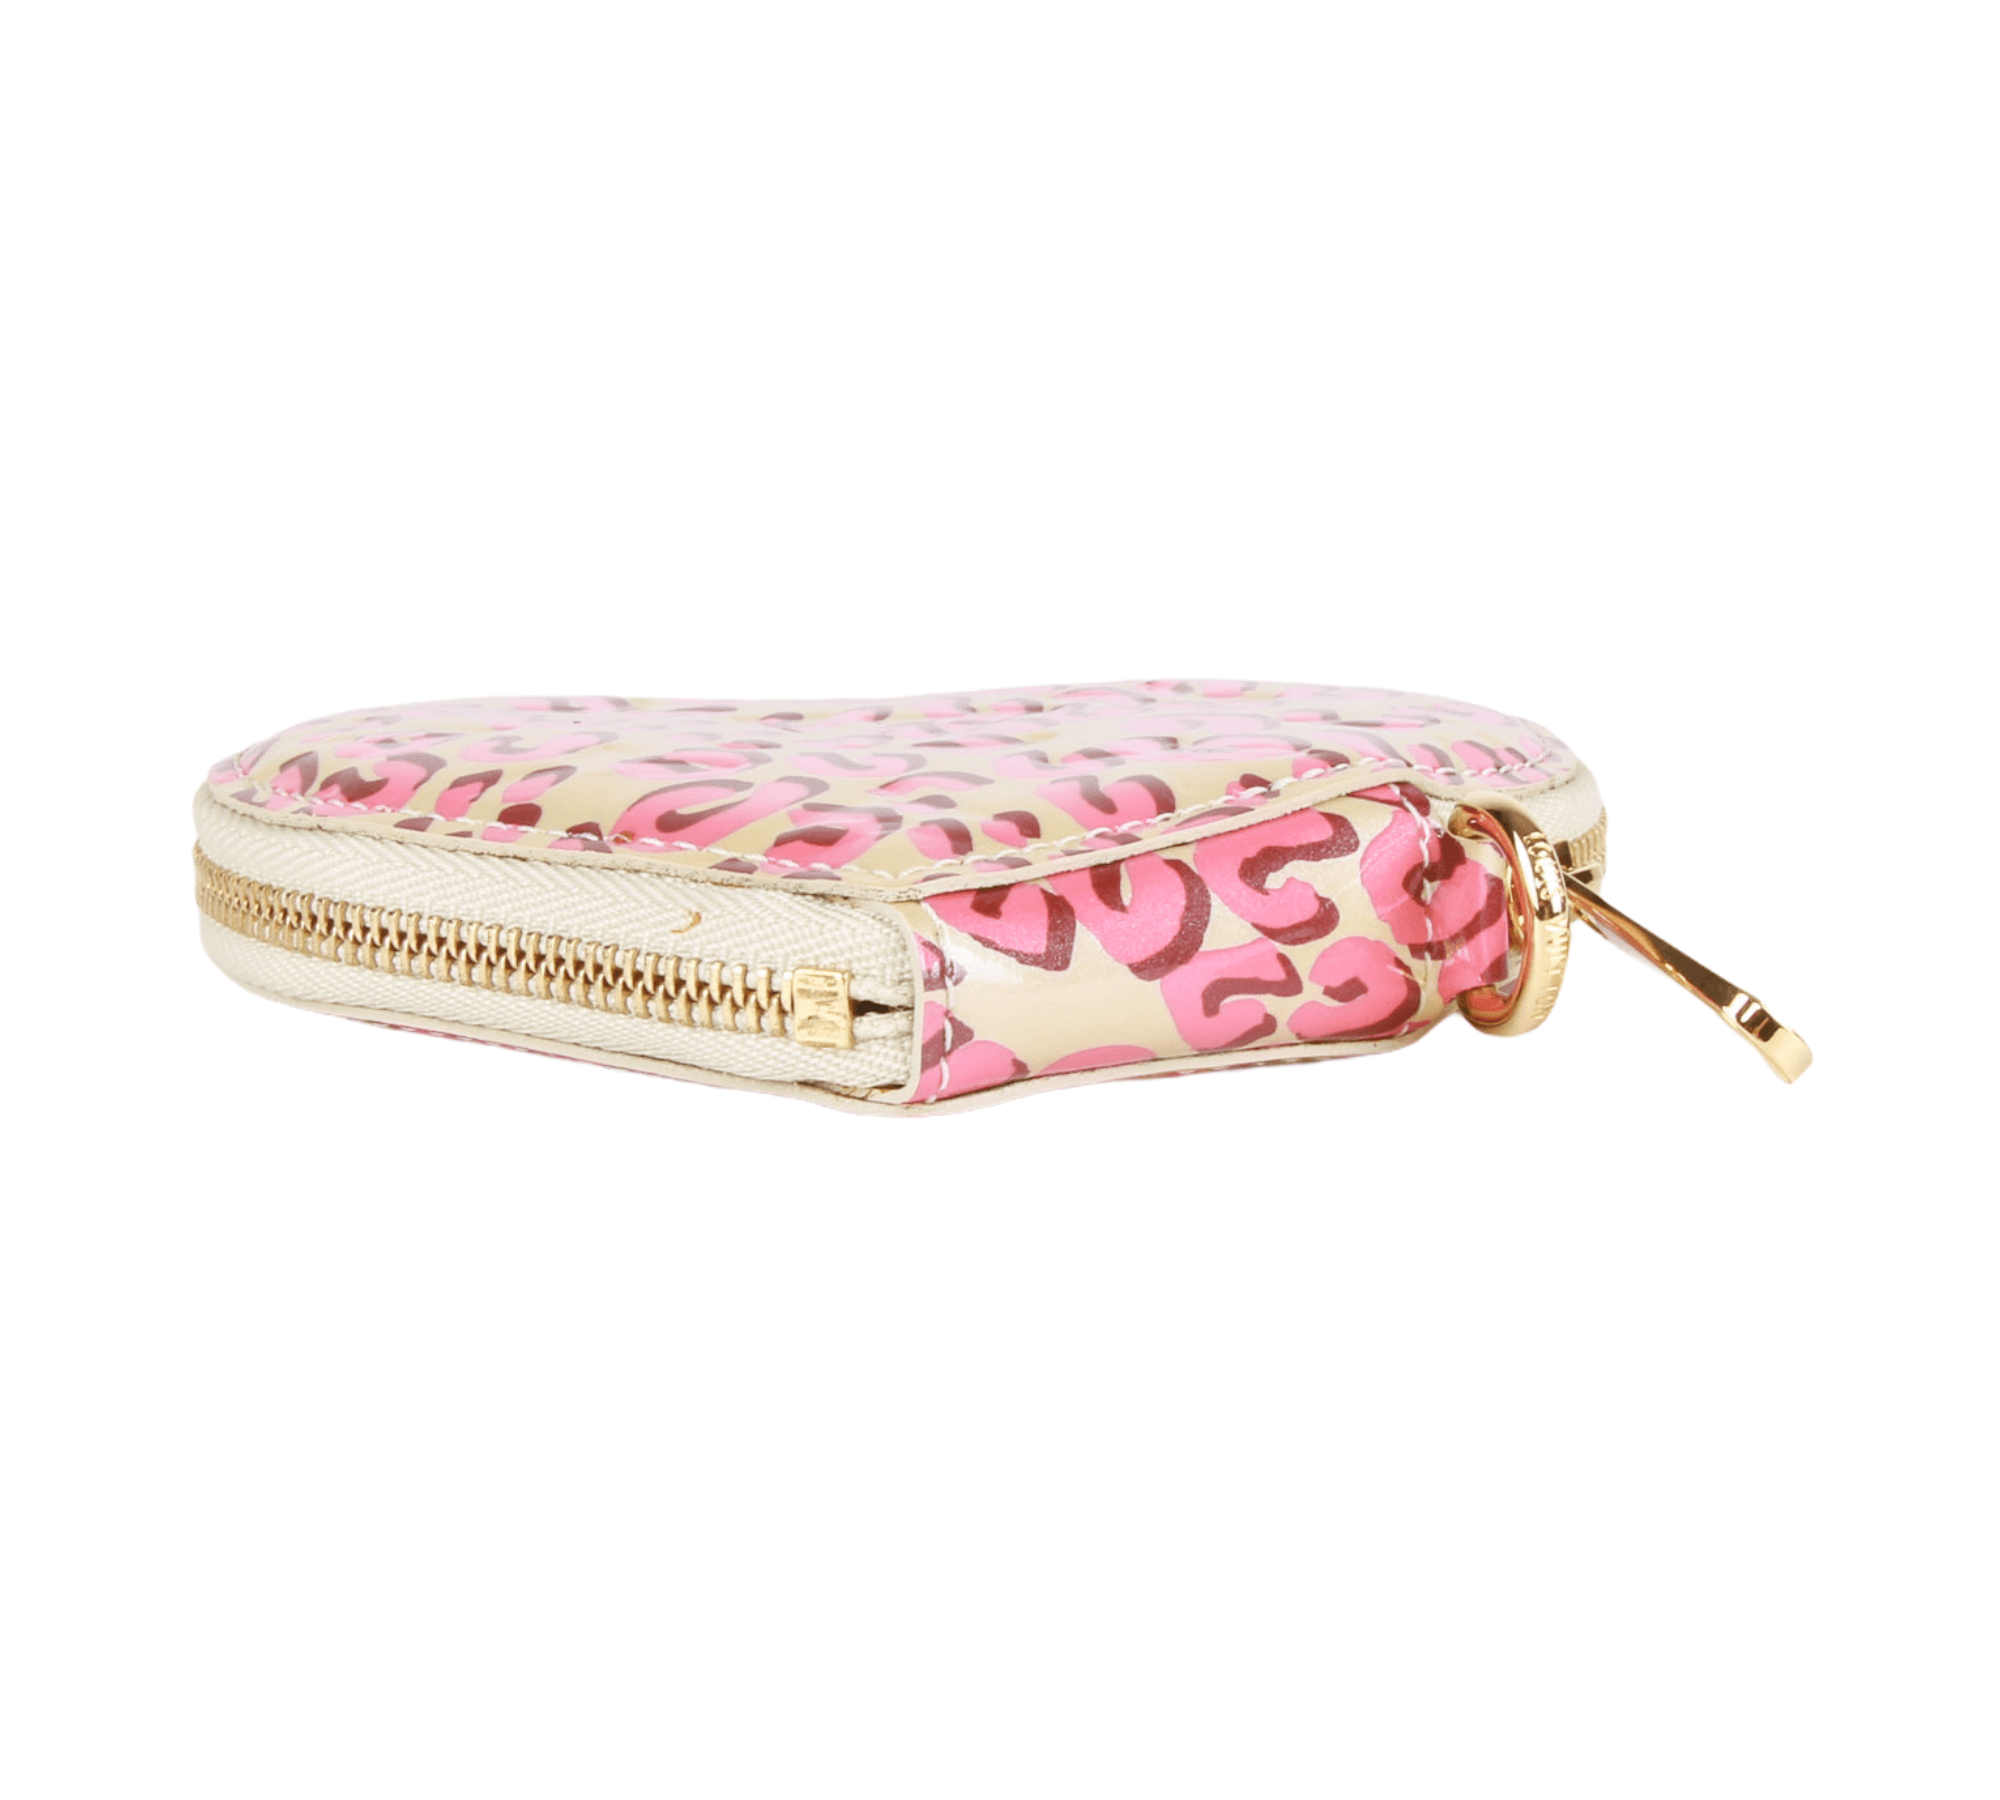 Louis Vuitton Limited Edition Stephen Sprouse Heart Coin Purse (SHF-15 –  LuxeDH